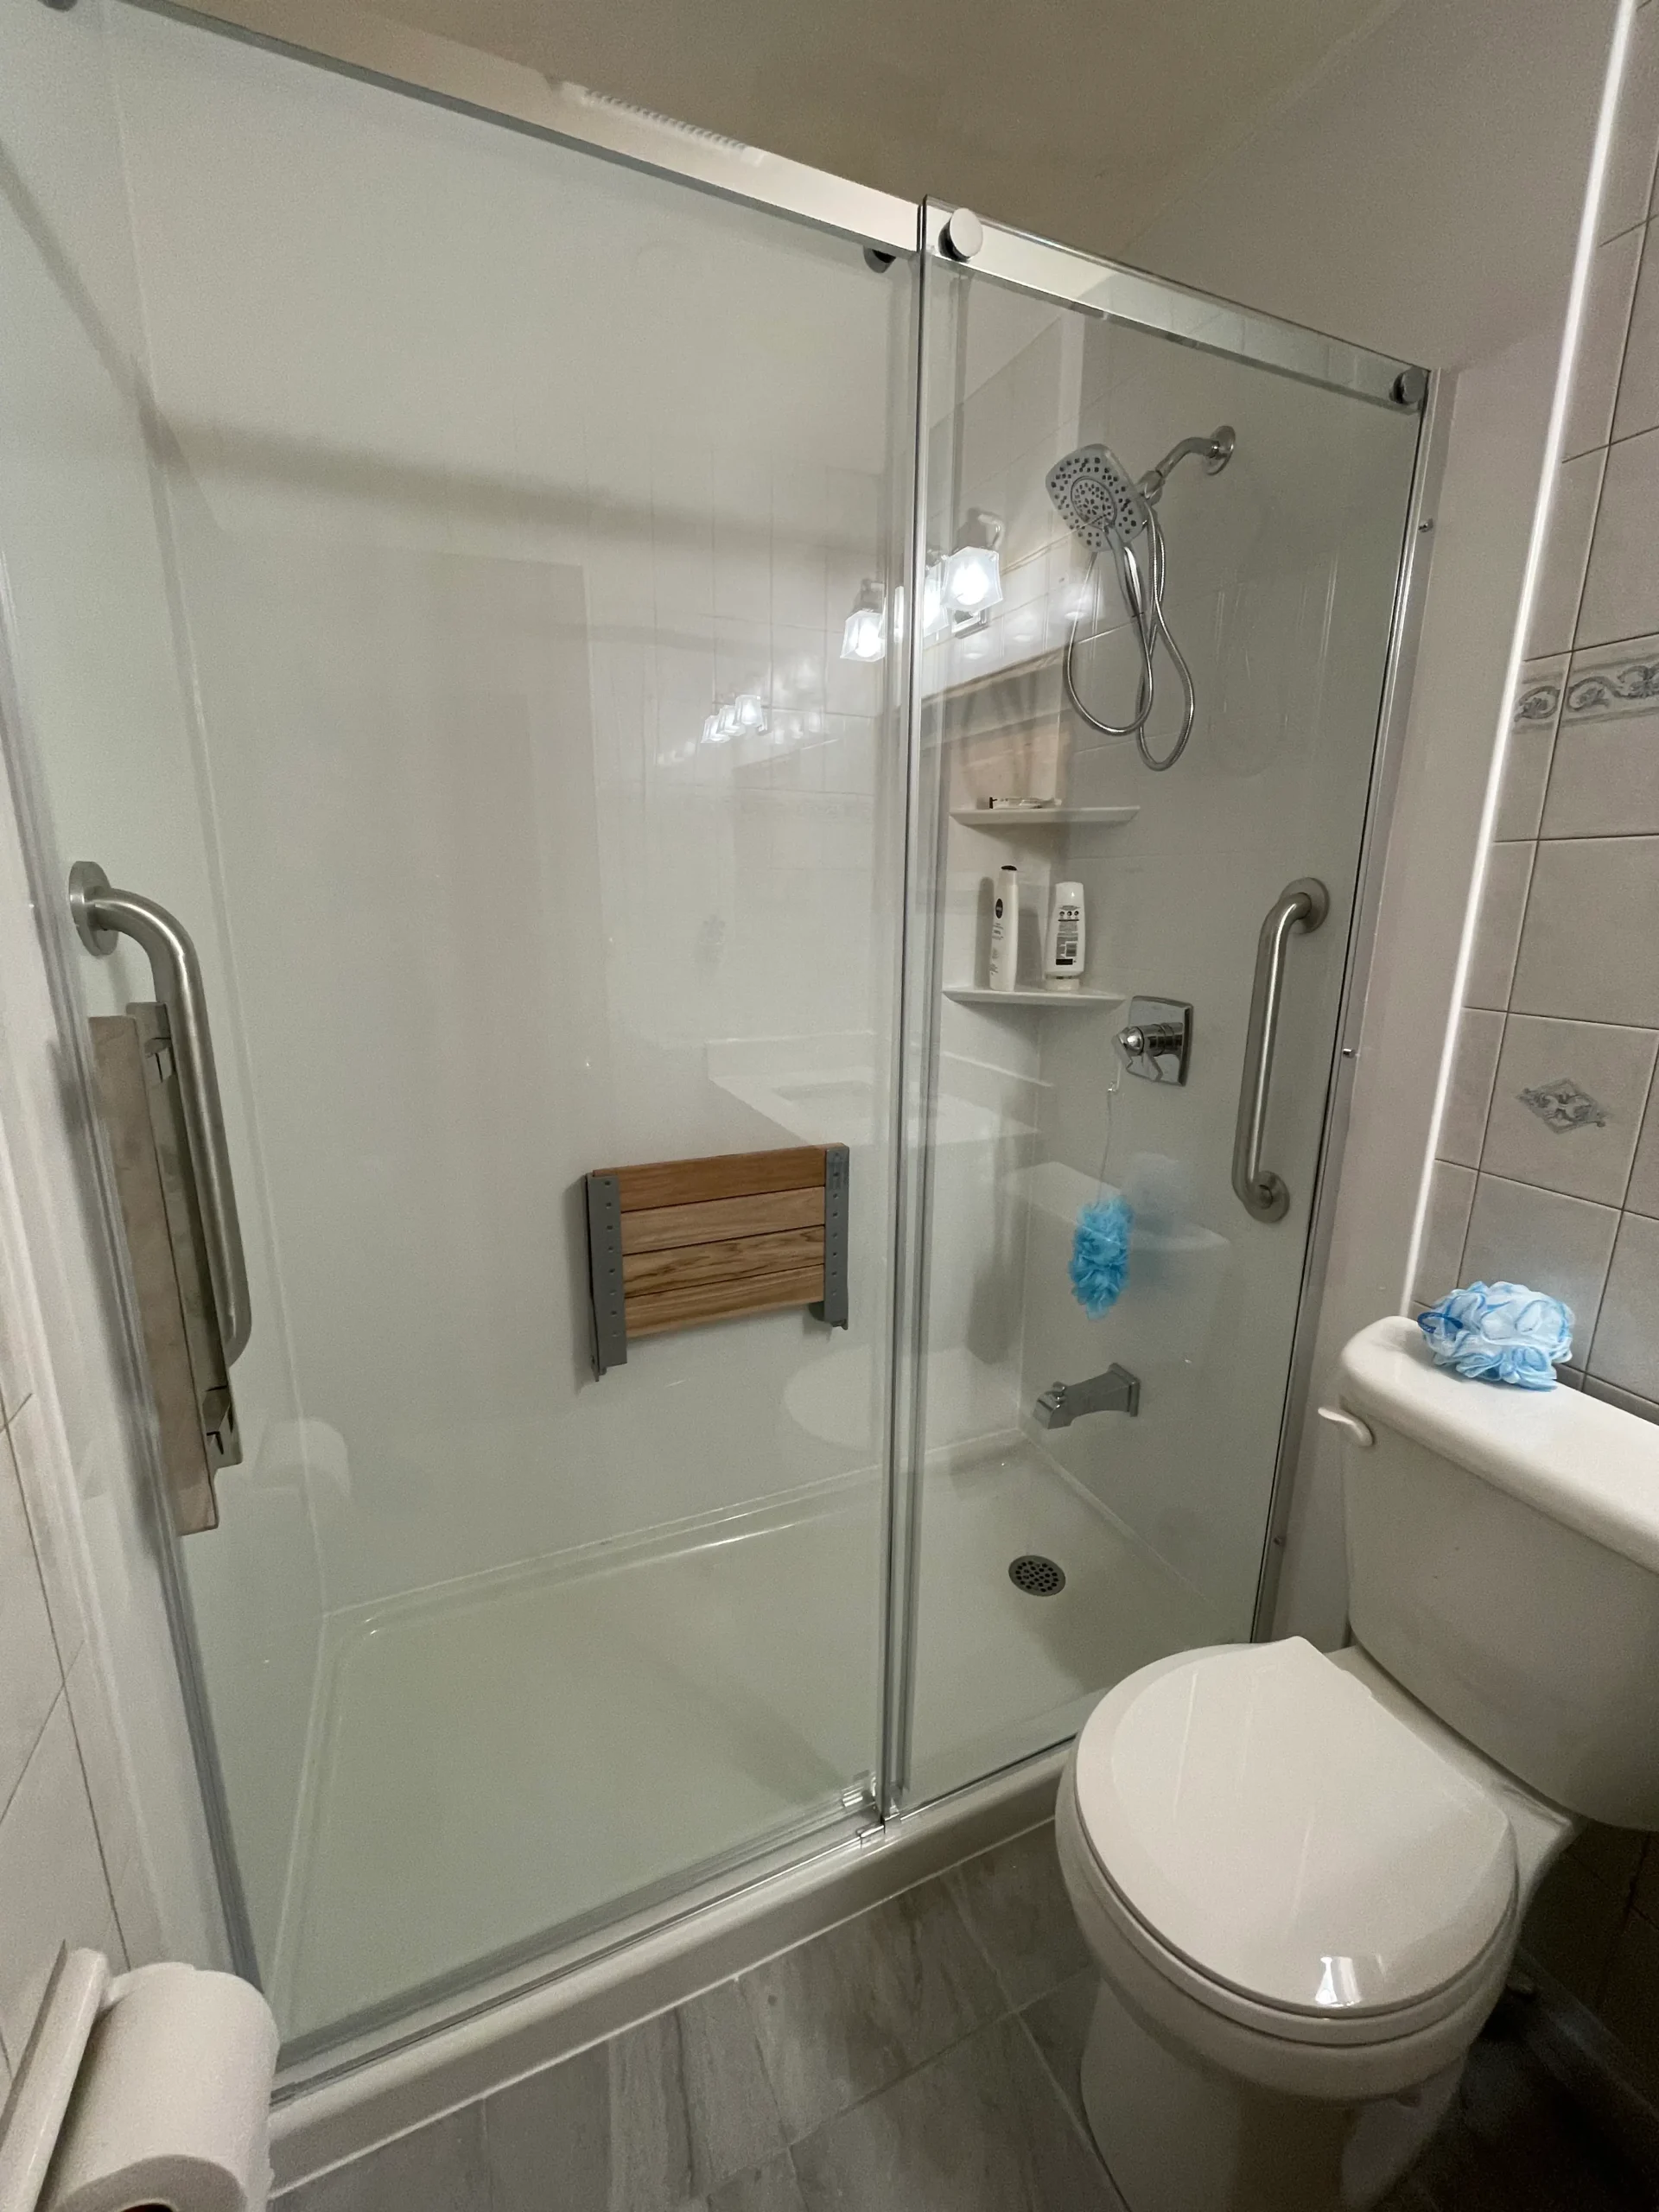 an image about A bathroom with a glass shower stall and acrylic panels.